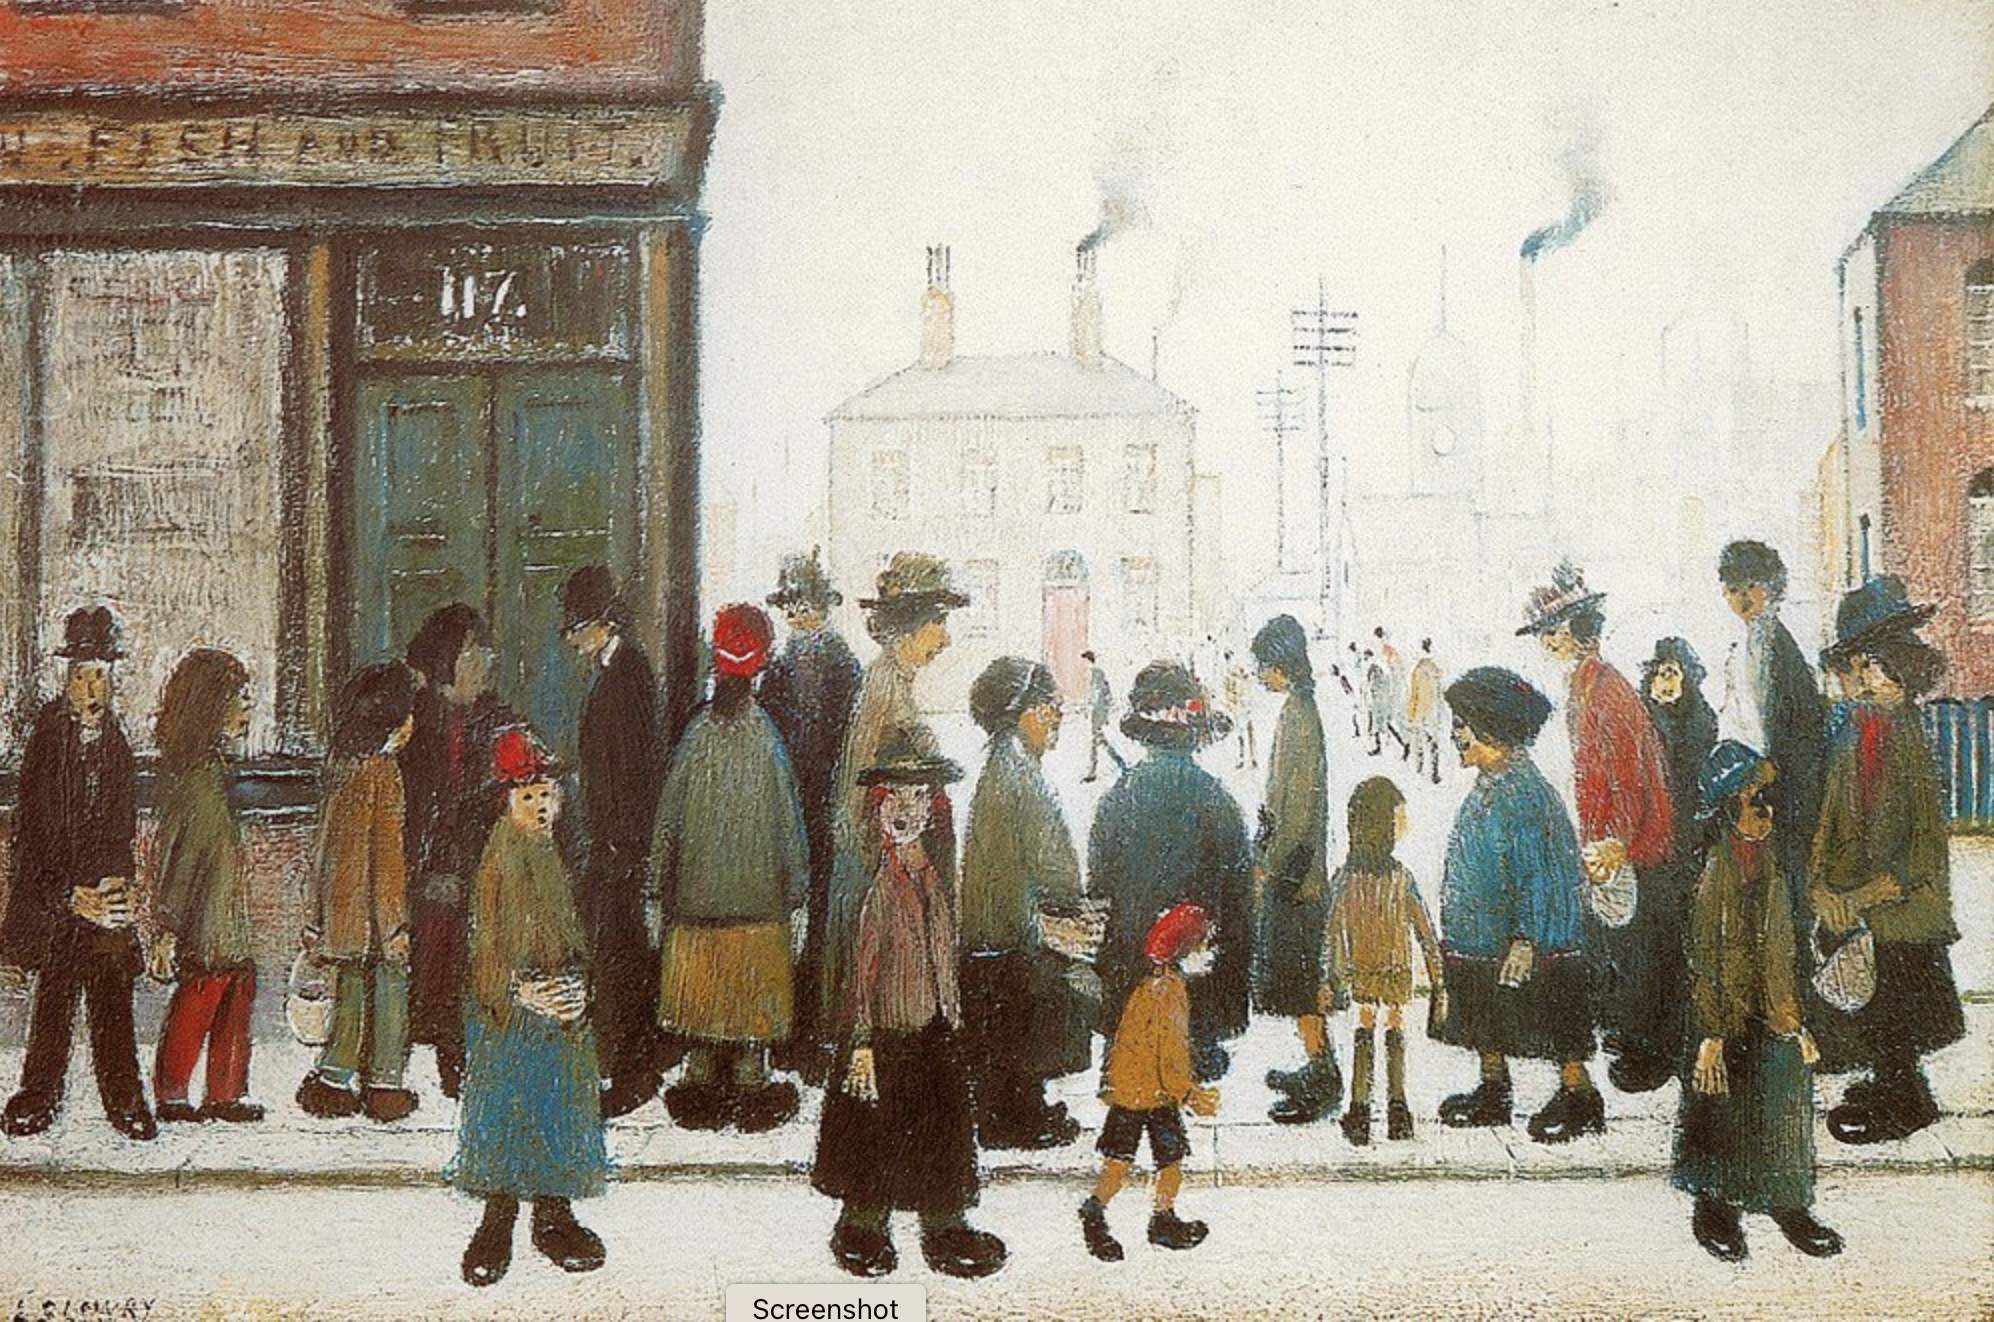 Waiting for the Shops to Open (1943) by Laurence Stephen Lowry (1887 - 1976), English artist.